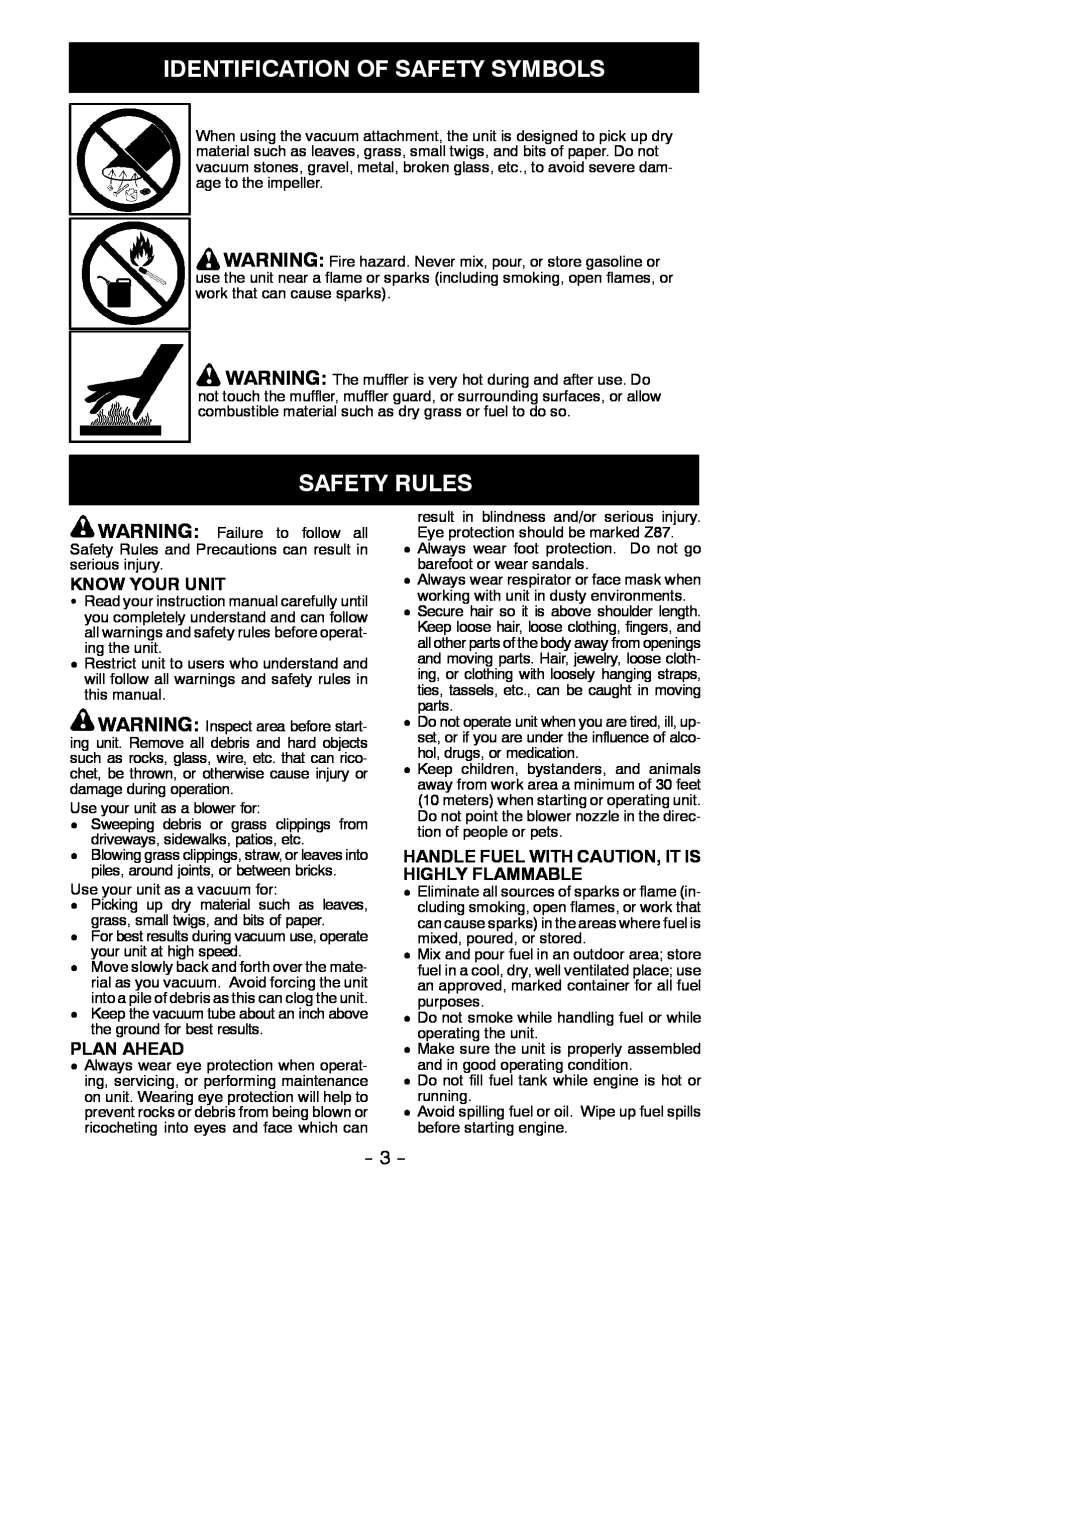 Poulan 545177387 instruction manual Safety Rules, Identification Of Safety Symbols, Know Your Unit, Plan Ahead 